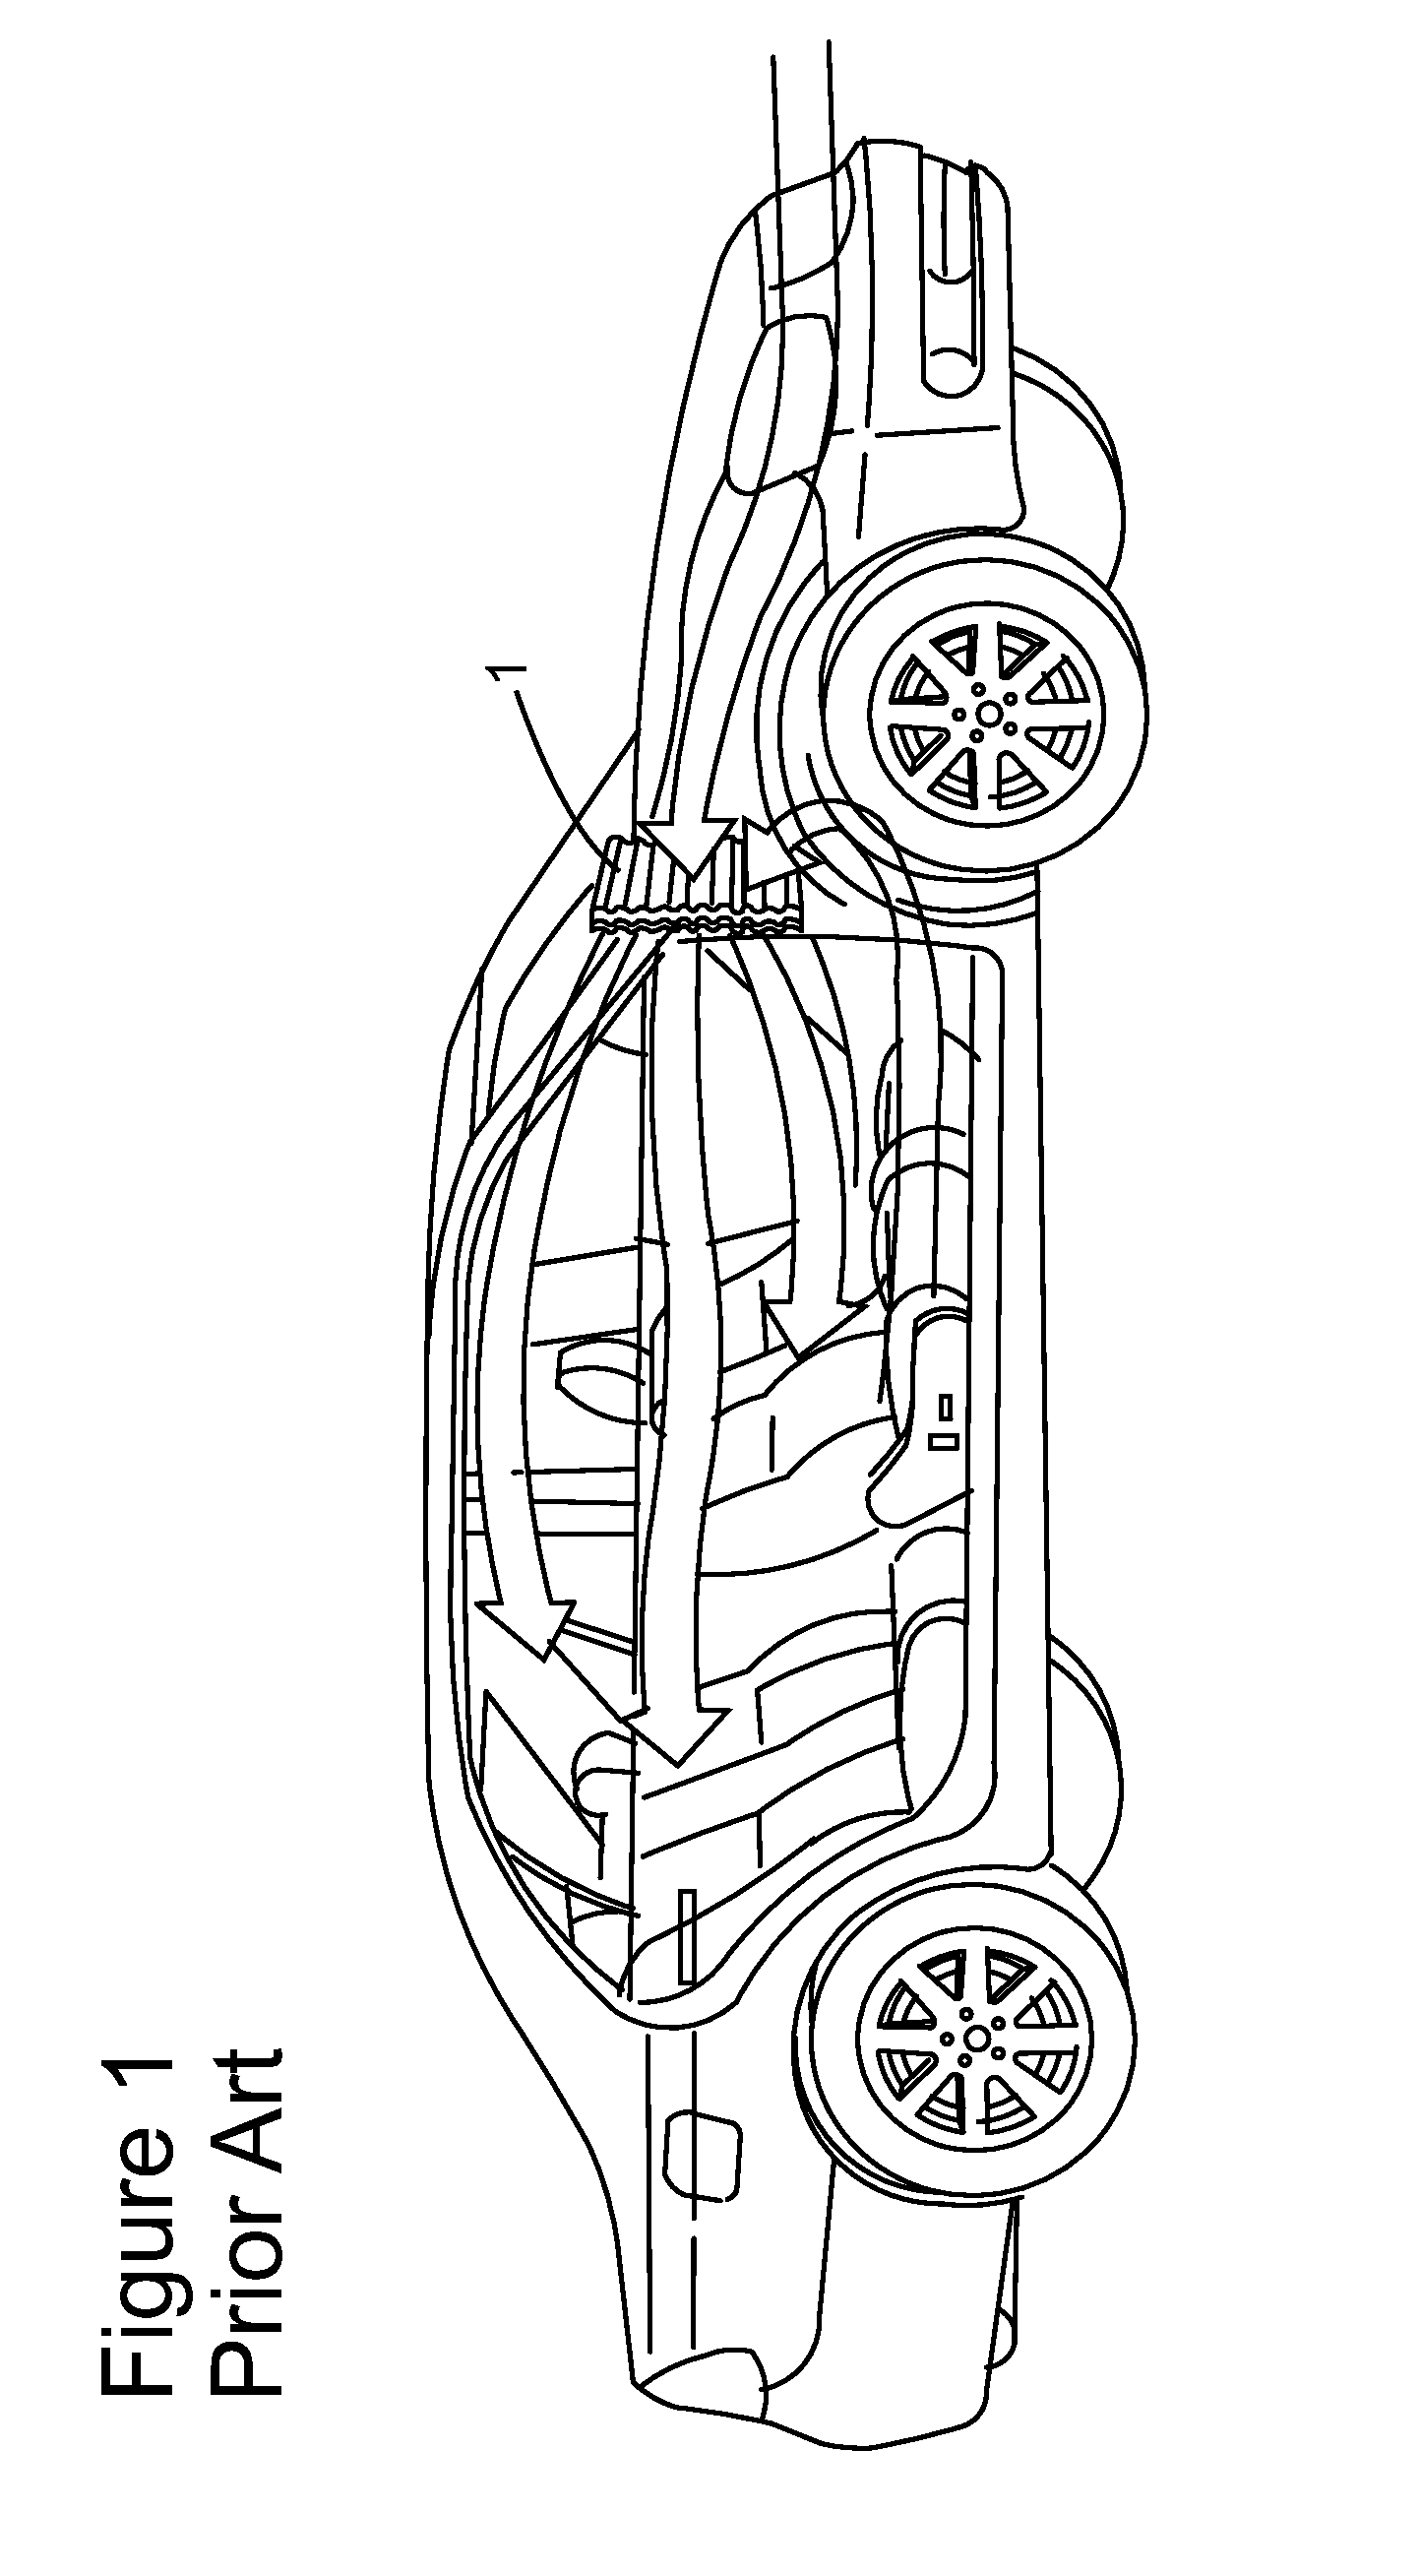 Ionization air purification system for the passenger cabin of a vehicle